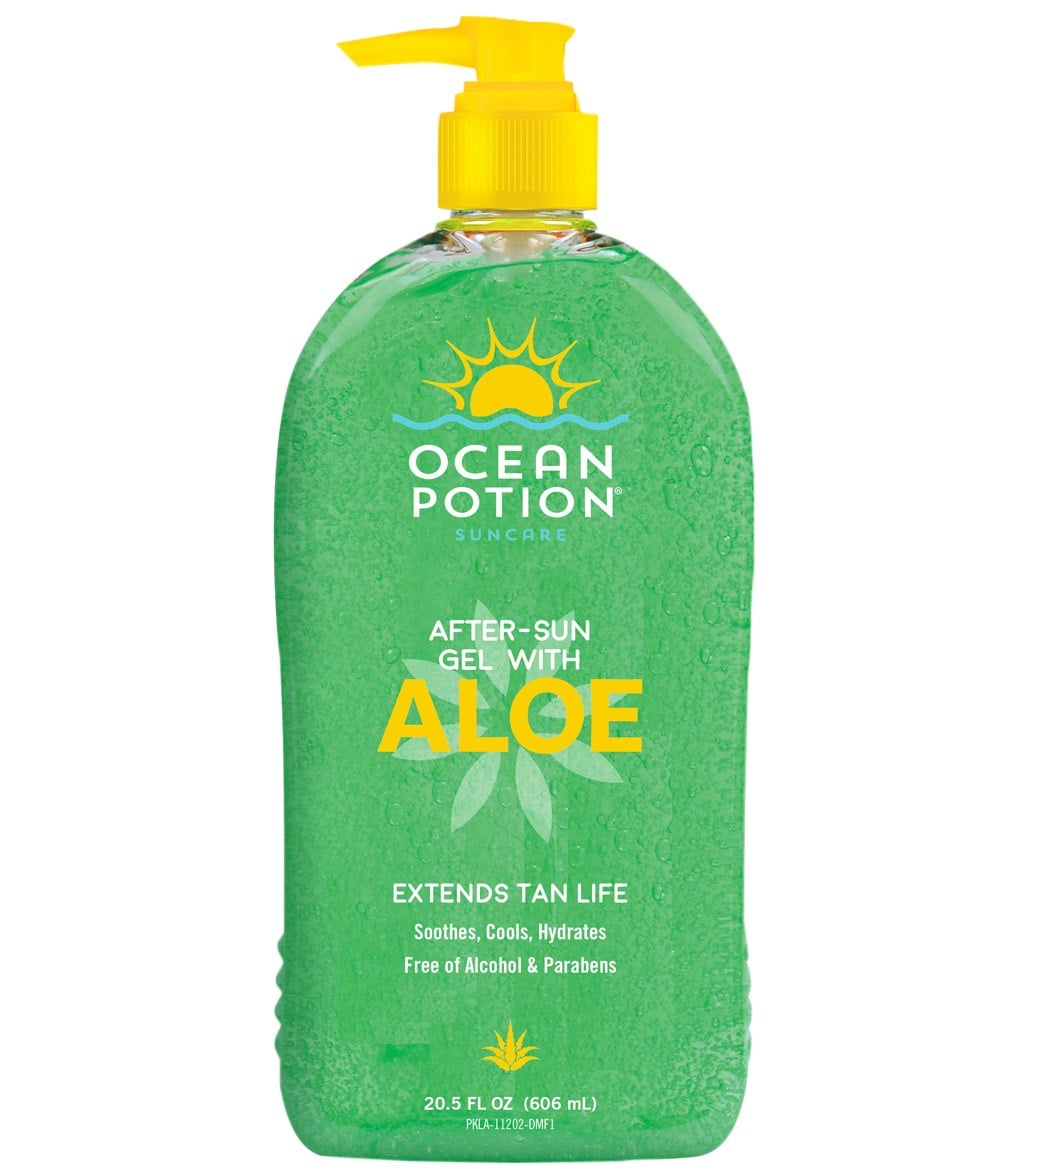 Ocean Potion® AfterSun Gel with Aloe 20.5oz at